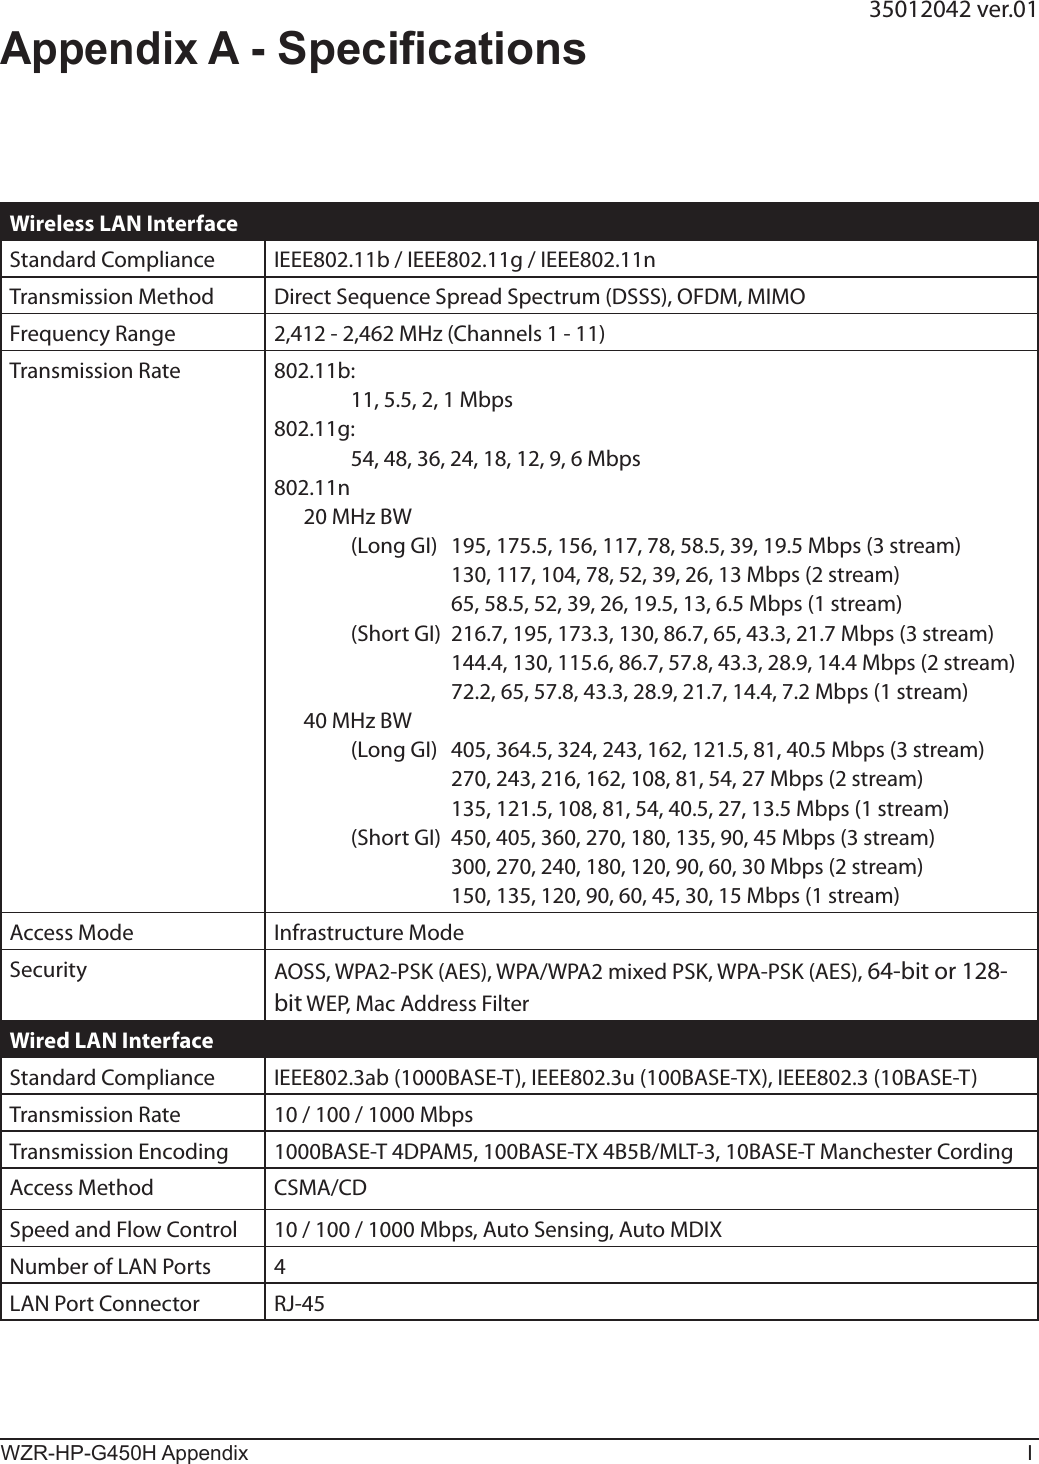 WZR-HP-G450H Appendix IWireless LAN InterfaceStandard Compliance IEEE802.11b / IEEE802.11g / IEEE802.11nTransmission Method Direct Sequence Spread Spectrum (DSSS), OFDM, MIMOFrequency Range 2,412 - 2,462 MHz (Channels 1 - 11)Transmission Rate 802.11b:    11, 5.5, 2, 1 Mbps802.11g:    54, 48, 36, 24, 18, 12, 9, 6 Mbps802.11n  20 MHz BW    (Long GI)  195, 175.5, 156, 117, 78, 58.5, 39, 19.5 Mbps (3 stream)      130, 117, 104, 78, 52, 39, 26, 13 Mbps (2 stream)      65, 58.5, 52, 39, 26, 19.5, 13, 6.5 Mbps (1 stream)    (Short GI)  216.7, 195, 173.3, 130, 86.7, 65, 43.3, 21.7 Mbps (3 stream)      144.4, 130, 115.6, 86.7, 57.8, 43.3, 28.9, 14.4 Mbps (2 stream)      72.2, 65, 57.8, 43.3, 28.9, 21.7, 14.4, 7.2 Mbps (1 stream)  40 MHz BW    (Long GI)  405, 364.5, 324, 243, 162, 121.5, 81, 40.5 Mbps (3 stream)      270, 243, 216, 162, 108, 81, 54, 27 Mbps (2 stream)      135, 121.5, 108, 81, 54, 40.5, 27, 13.5 Mbps (1 stream)    (Short GI)  450, 405, 360, 270, 180, 135, 90, 45 Mbps (3 stream)      300, 270, 240, 180, 120, 90, 60, 30 Mbps (2 stream)      150, 135, 120, 90, 60, 45, 30, 15 Mbps (1 stream)Access Mode Infrastructure ModeSecurity AOSS, WPA2-PSK (AES), WPA/WPA2 mixed PSK, WPA-PSK (AES), 64-bit or 128-bit WEP, Mac Address FilterWired LAN InterfaceStandard Compliance IEEE802.3ab (1000BASE-T), IEEE802.3u (100BASE-TX), IEEE802.3 (10BASE-T)Transmission Rate 10 / 100 / 1000 MbpsTransmission Encoding 1000BASE-T 4DPAM5, 100BASE-TX 4B5B/MLT-3, 10BASE-T Manchester CordingAccess Method CSMA/CDSpeed and Flow Control 10 / 100 / 1000 Mbps, Auto Sensing, Auto MDIXNumber of LAN Ports 4LAN Port Connector RJ-45Appendix A - Specications35012042 ver.01